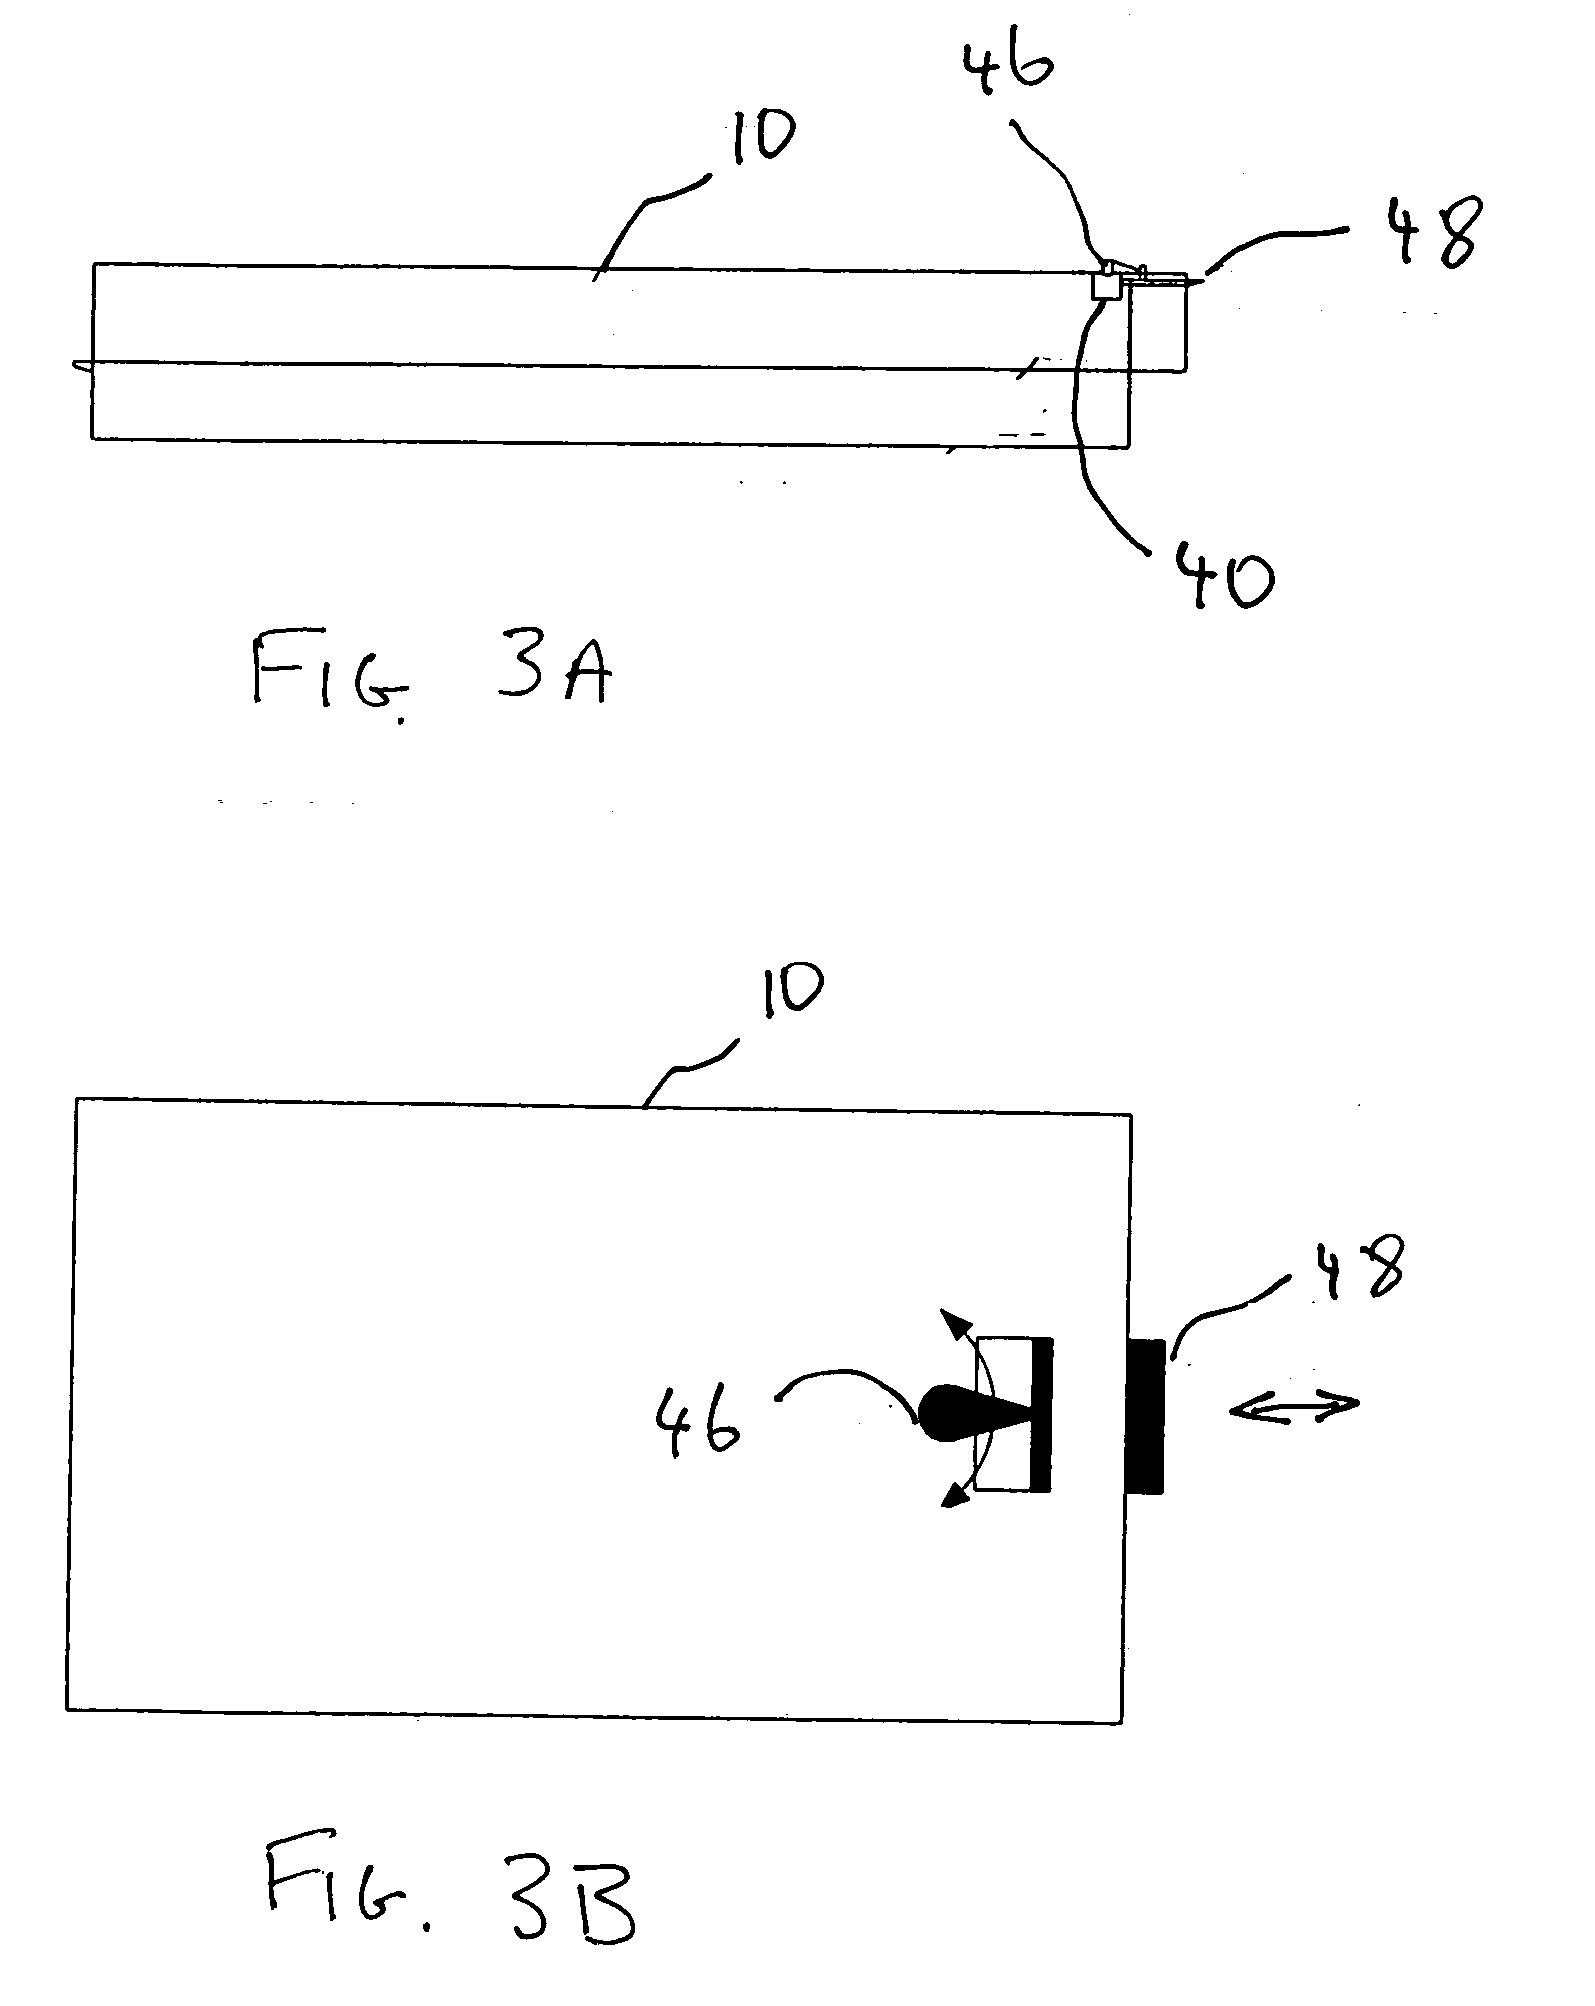 Battery with non-volatile memory for LMR portable radio applications